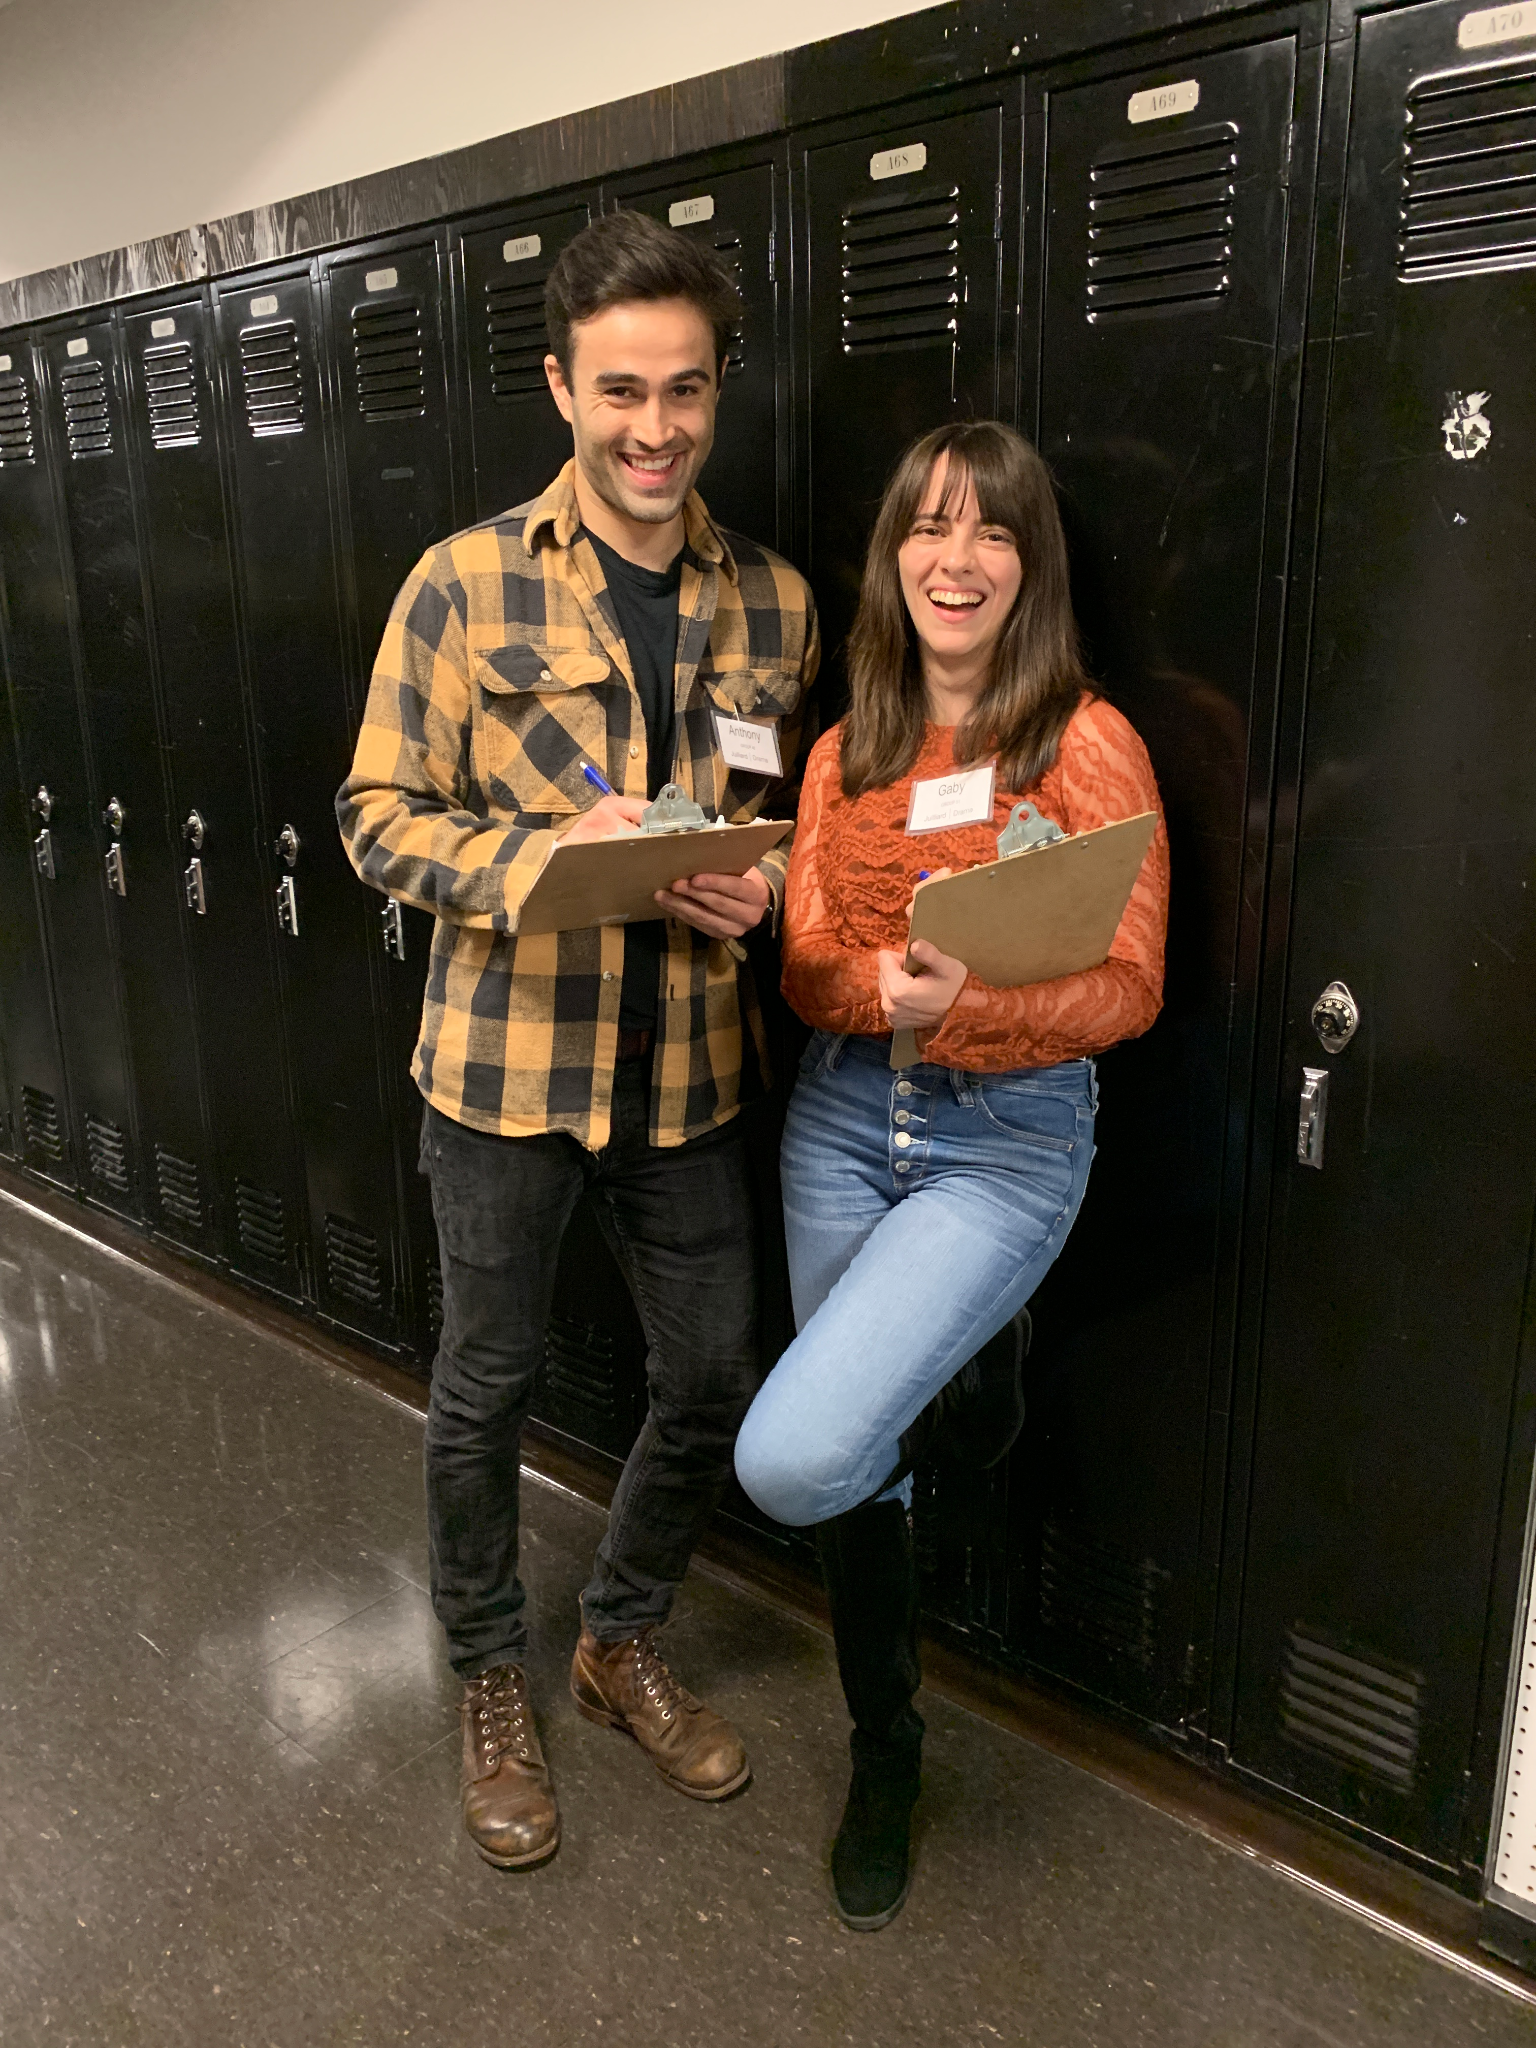 Gabriela and a friend pose in front of lockers